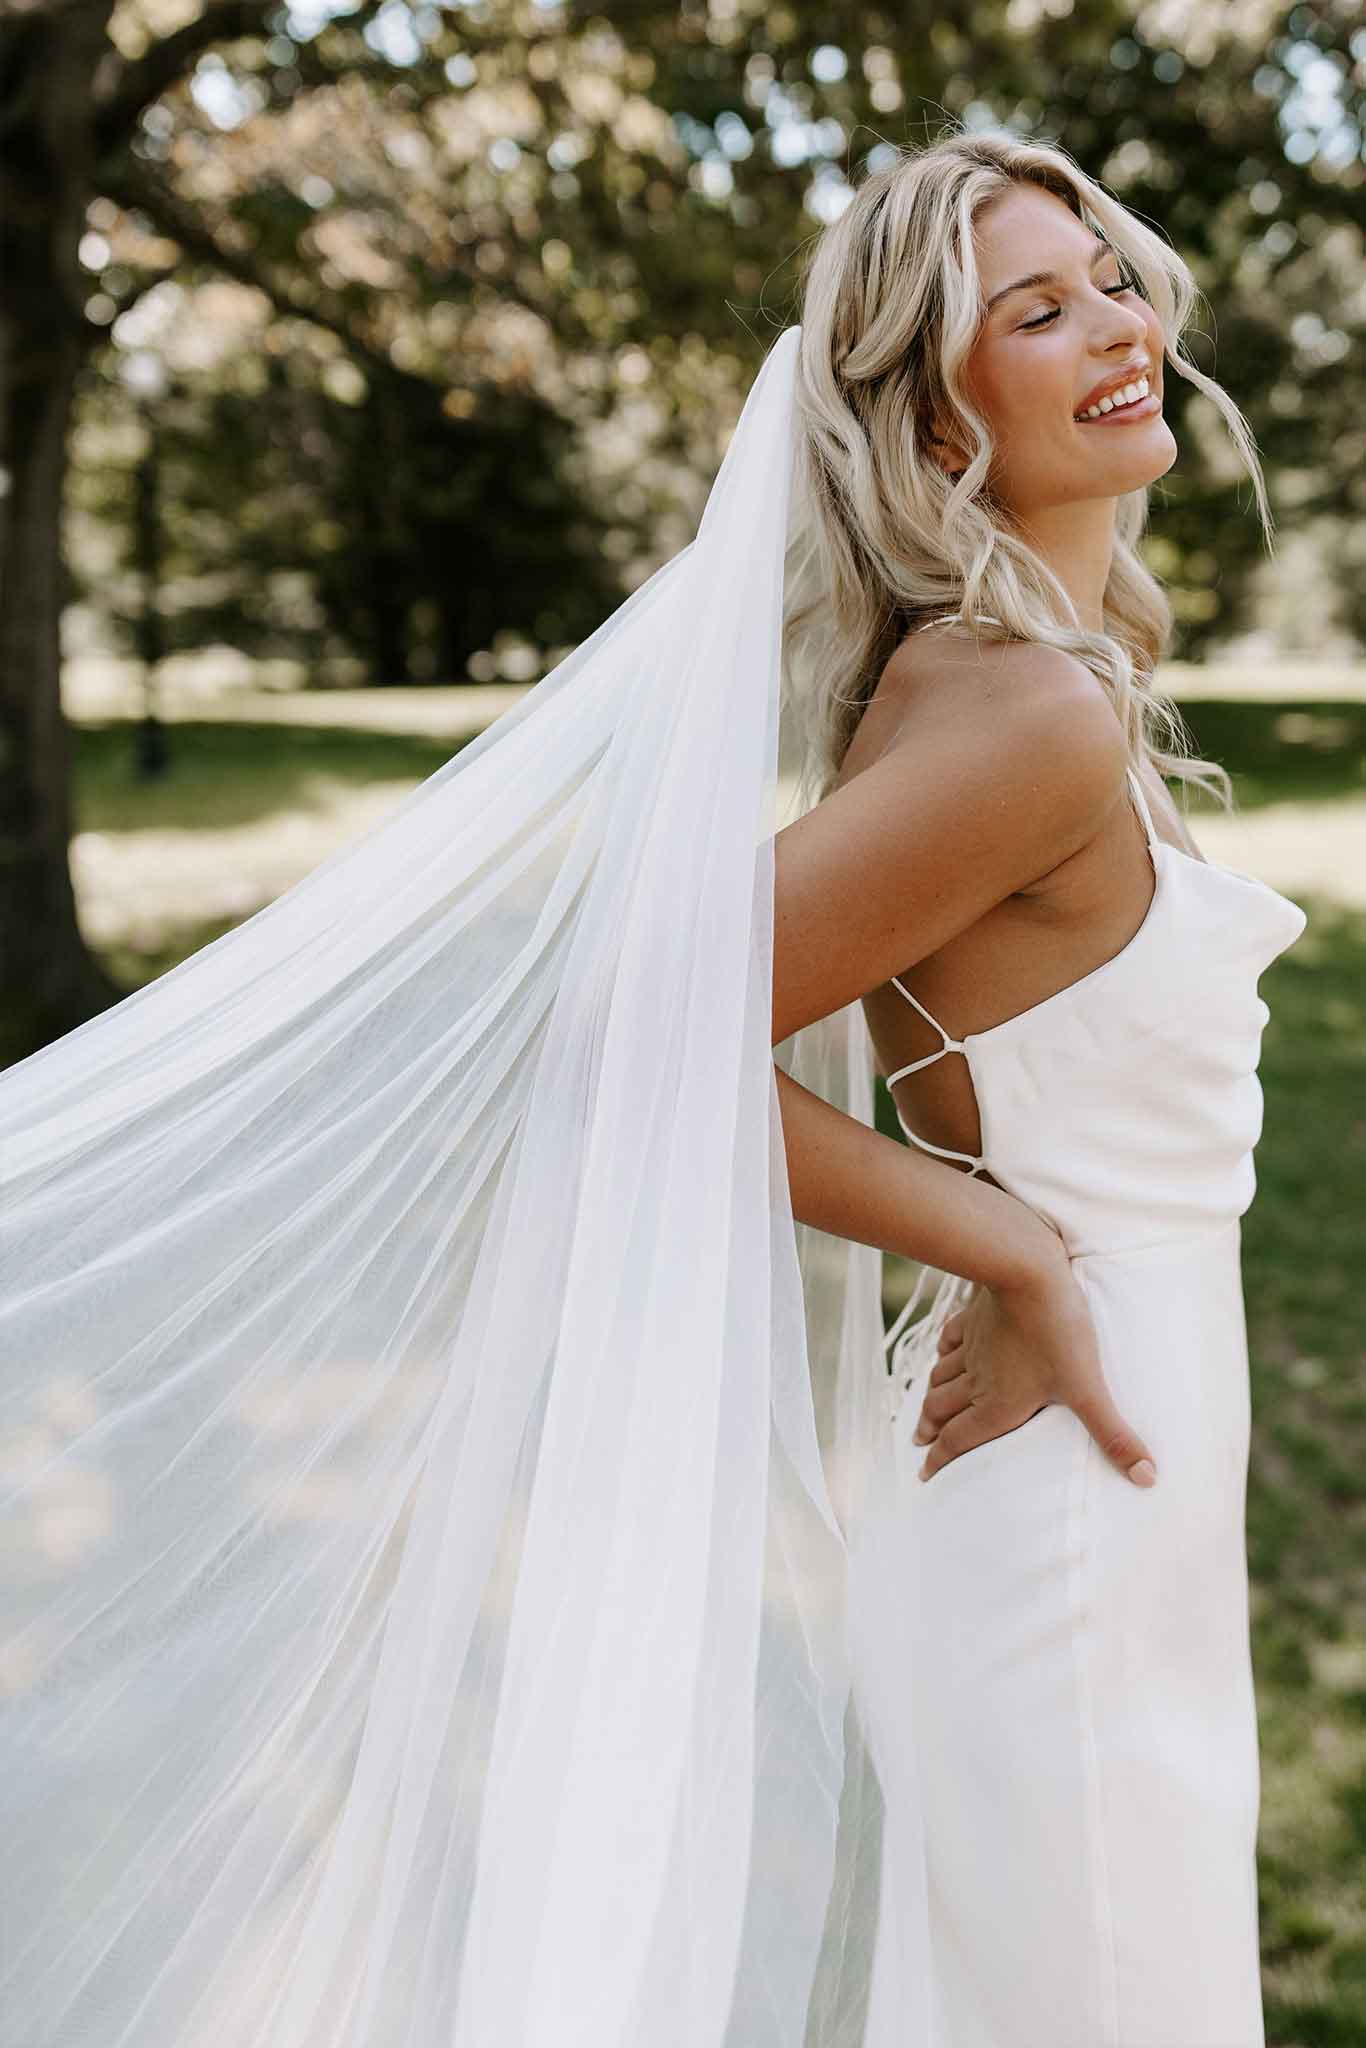 Grace Loves Lace Pearly Blusher Veil | Wedding Veils